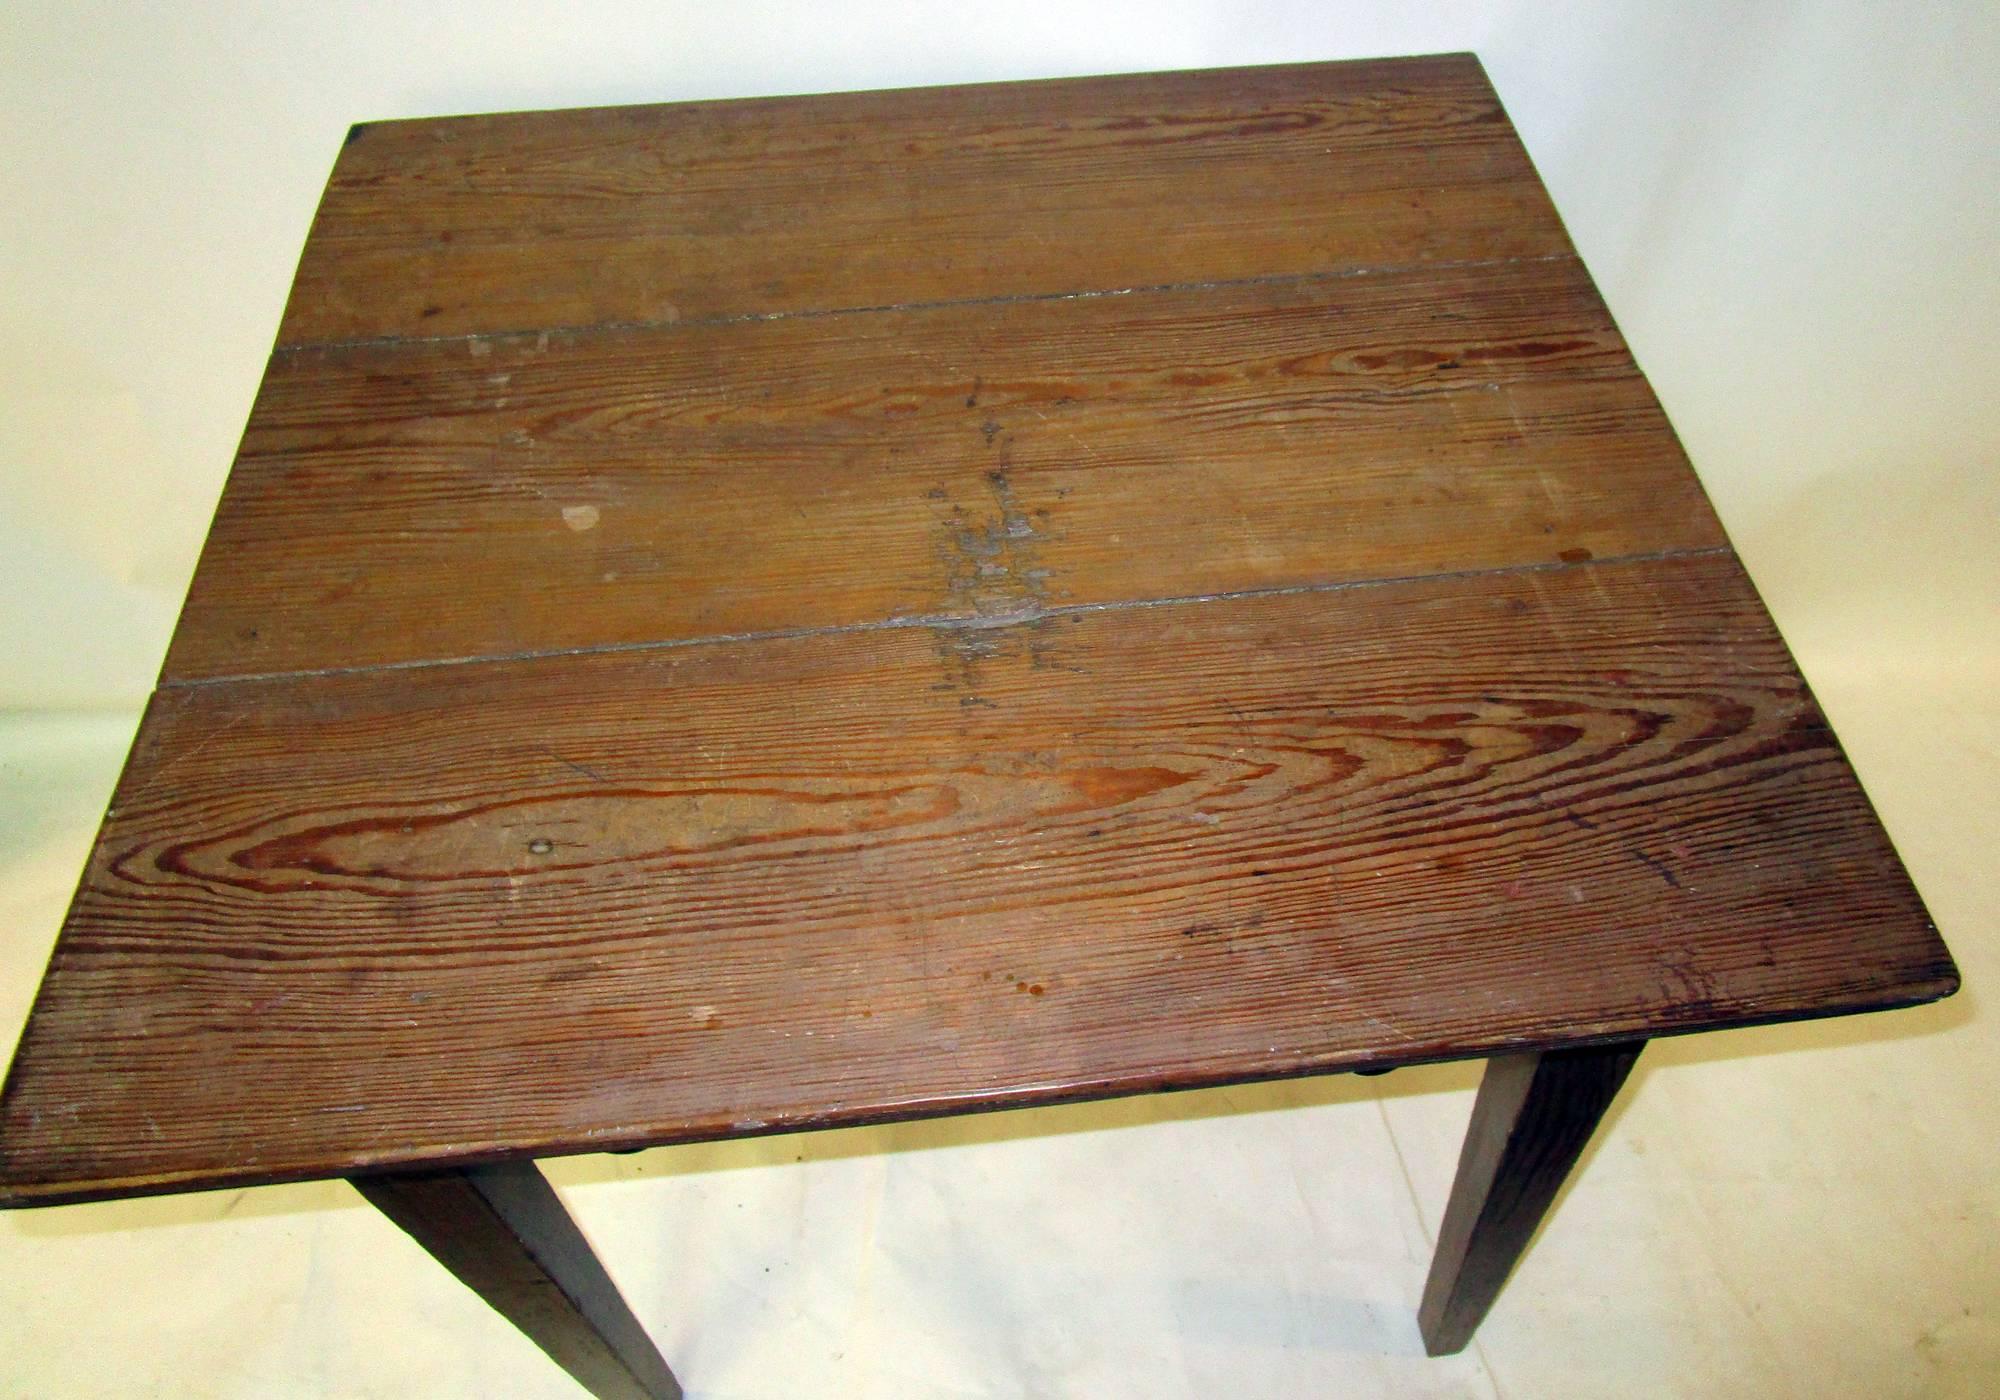 19th century American Primitive Cypress Work Table In Good Condition For Sale In Savannah, GA